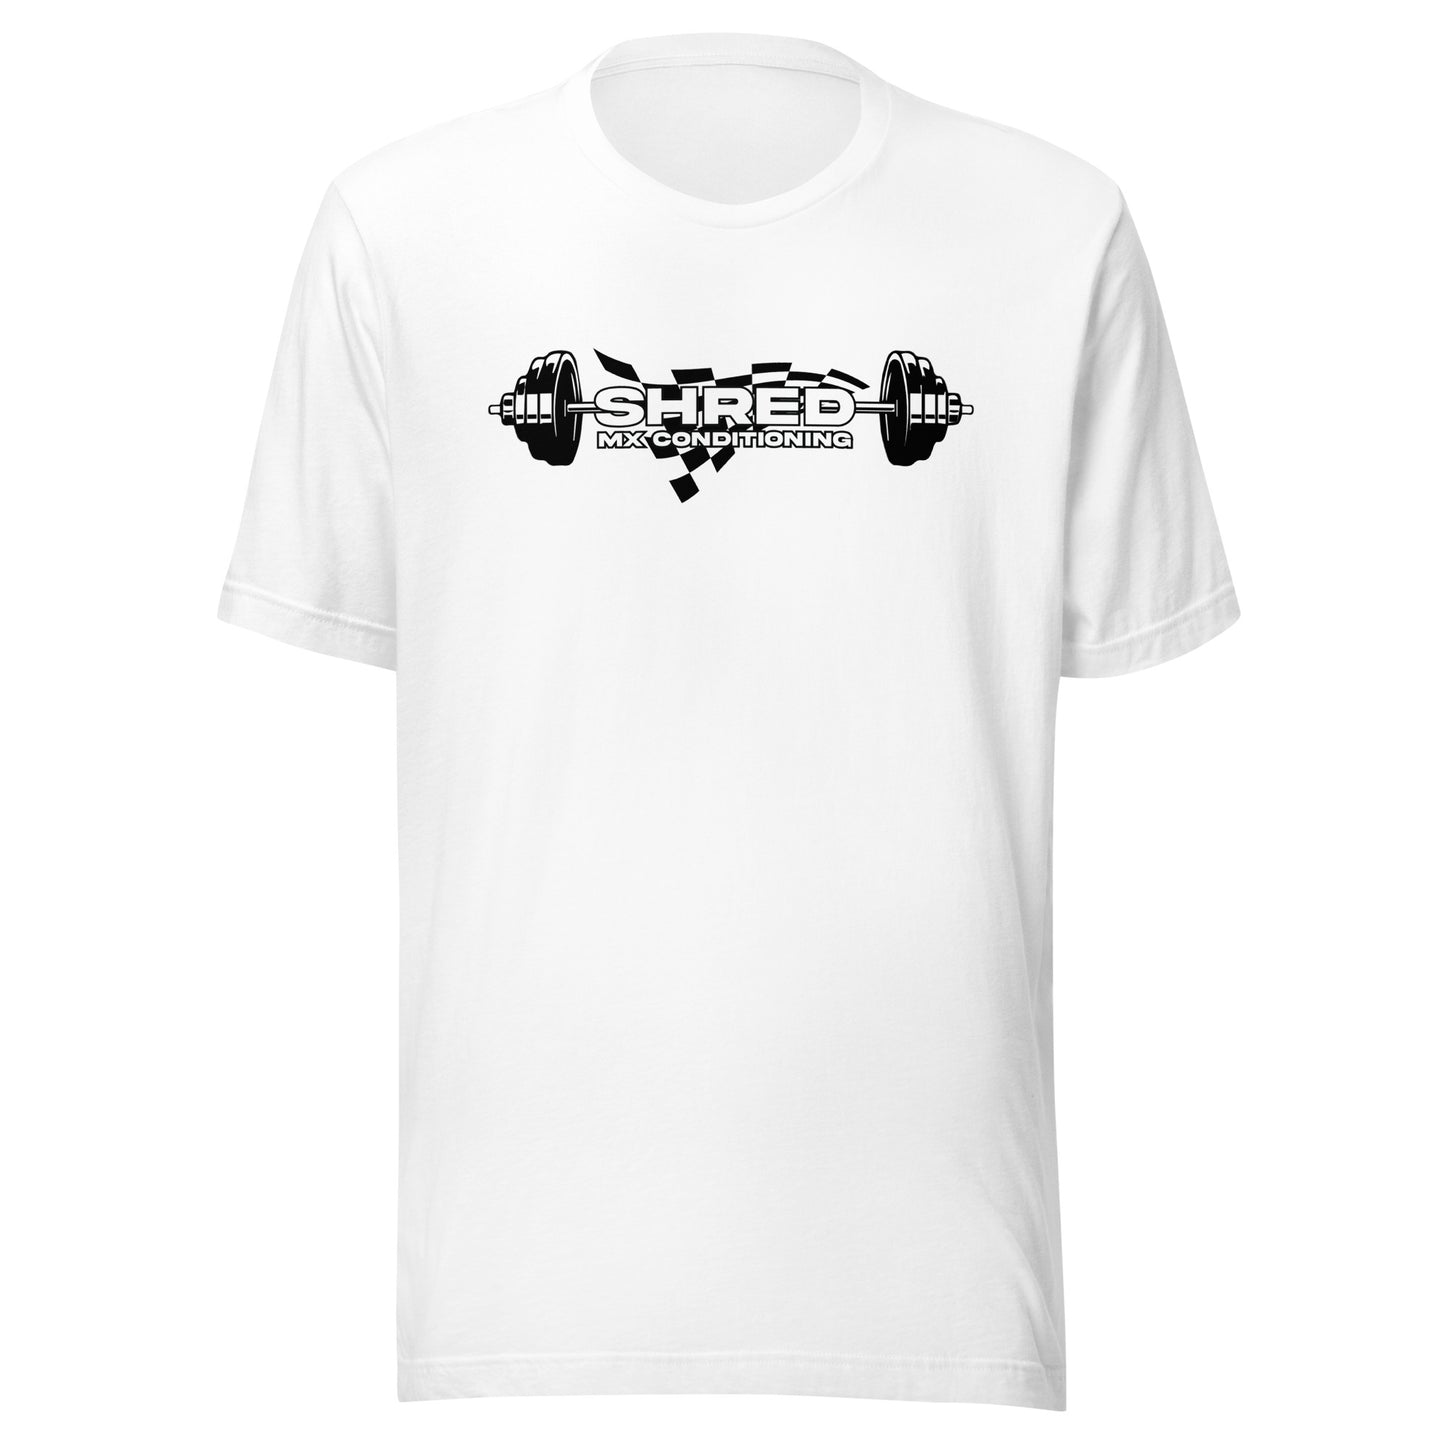 Shred MX Conditioning T-Shirt